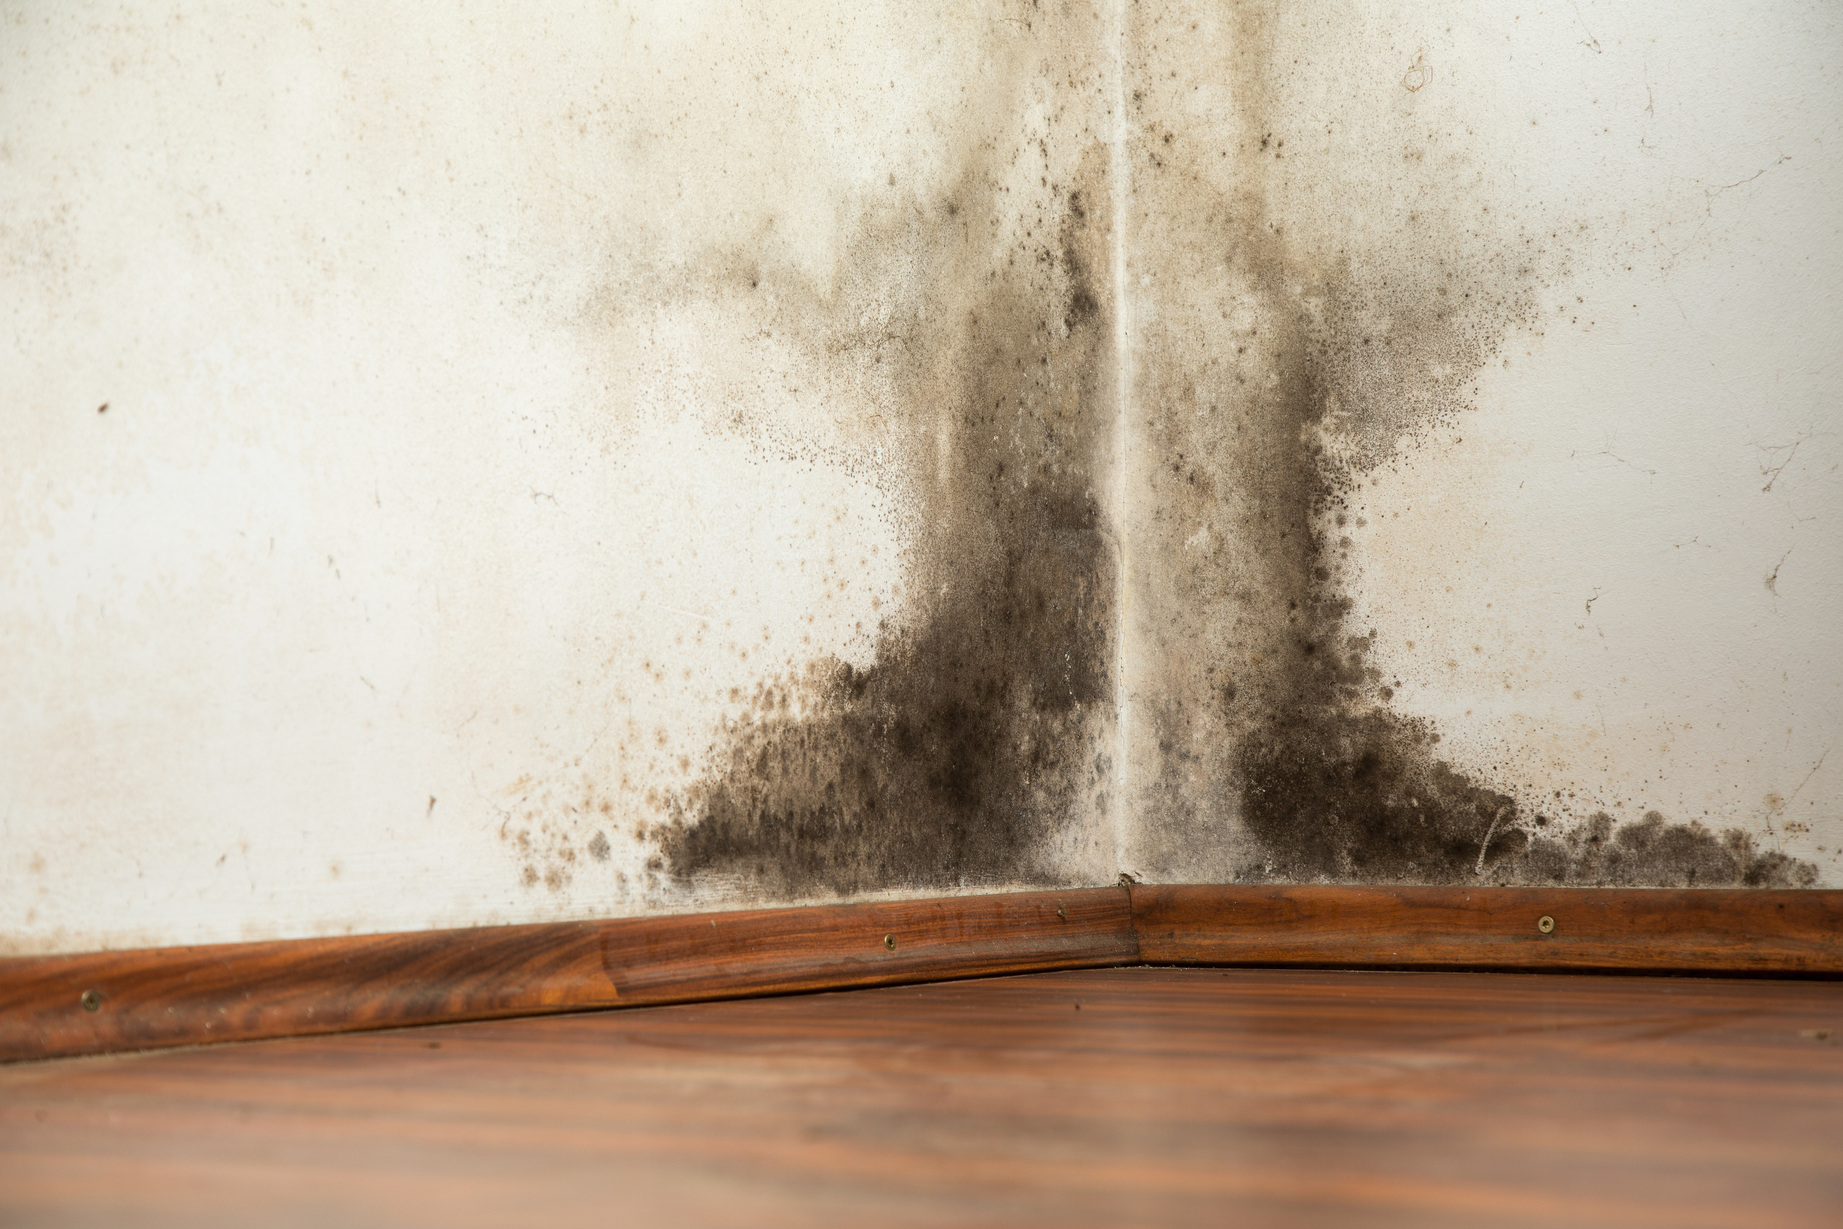 Black mold at the corner of the house